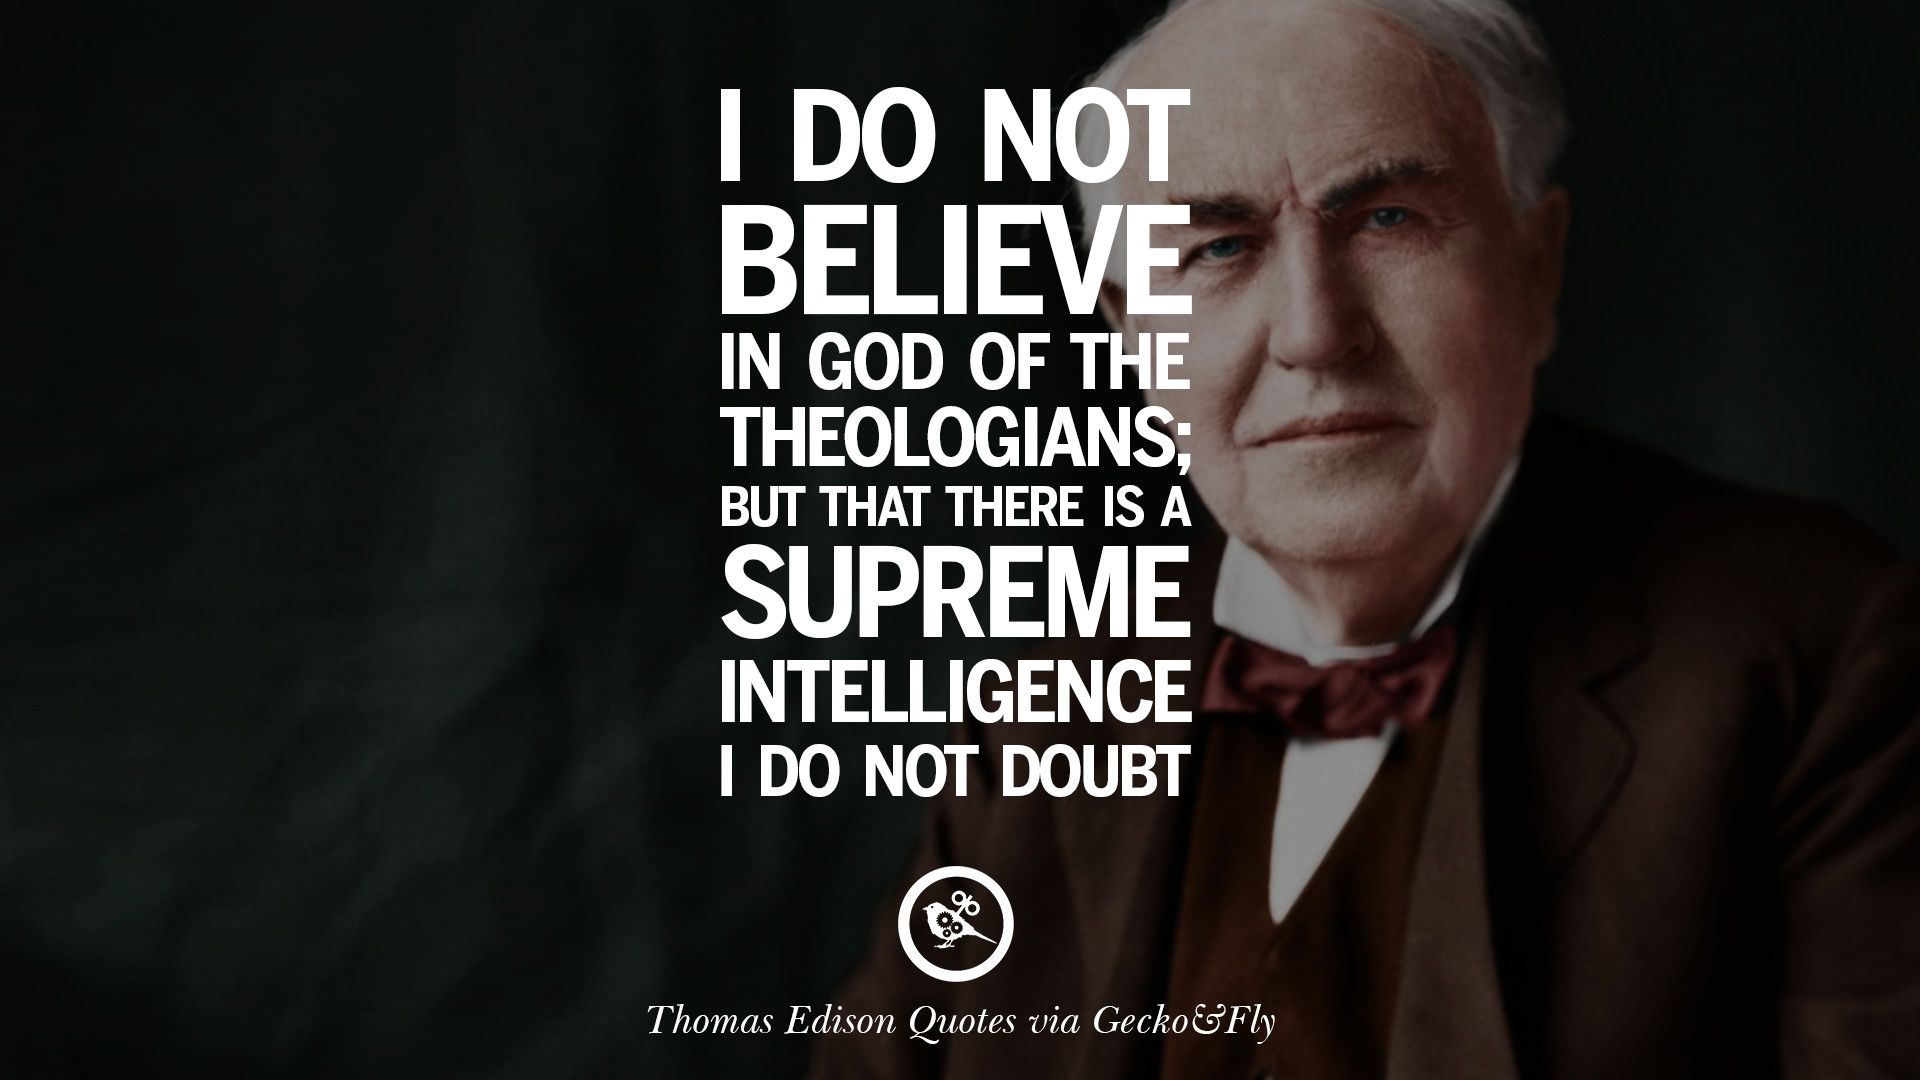 Empowering Quotes By Thomas Edison On Hard Work And Success